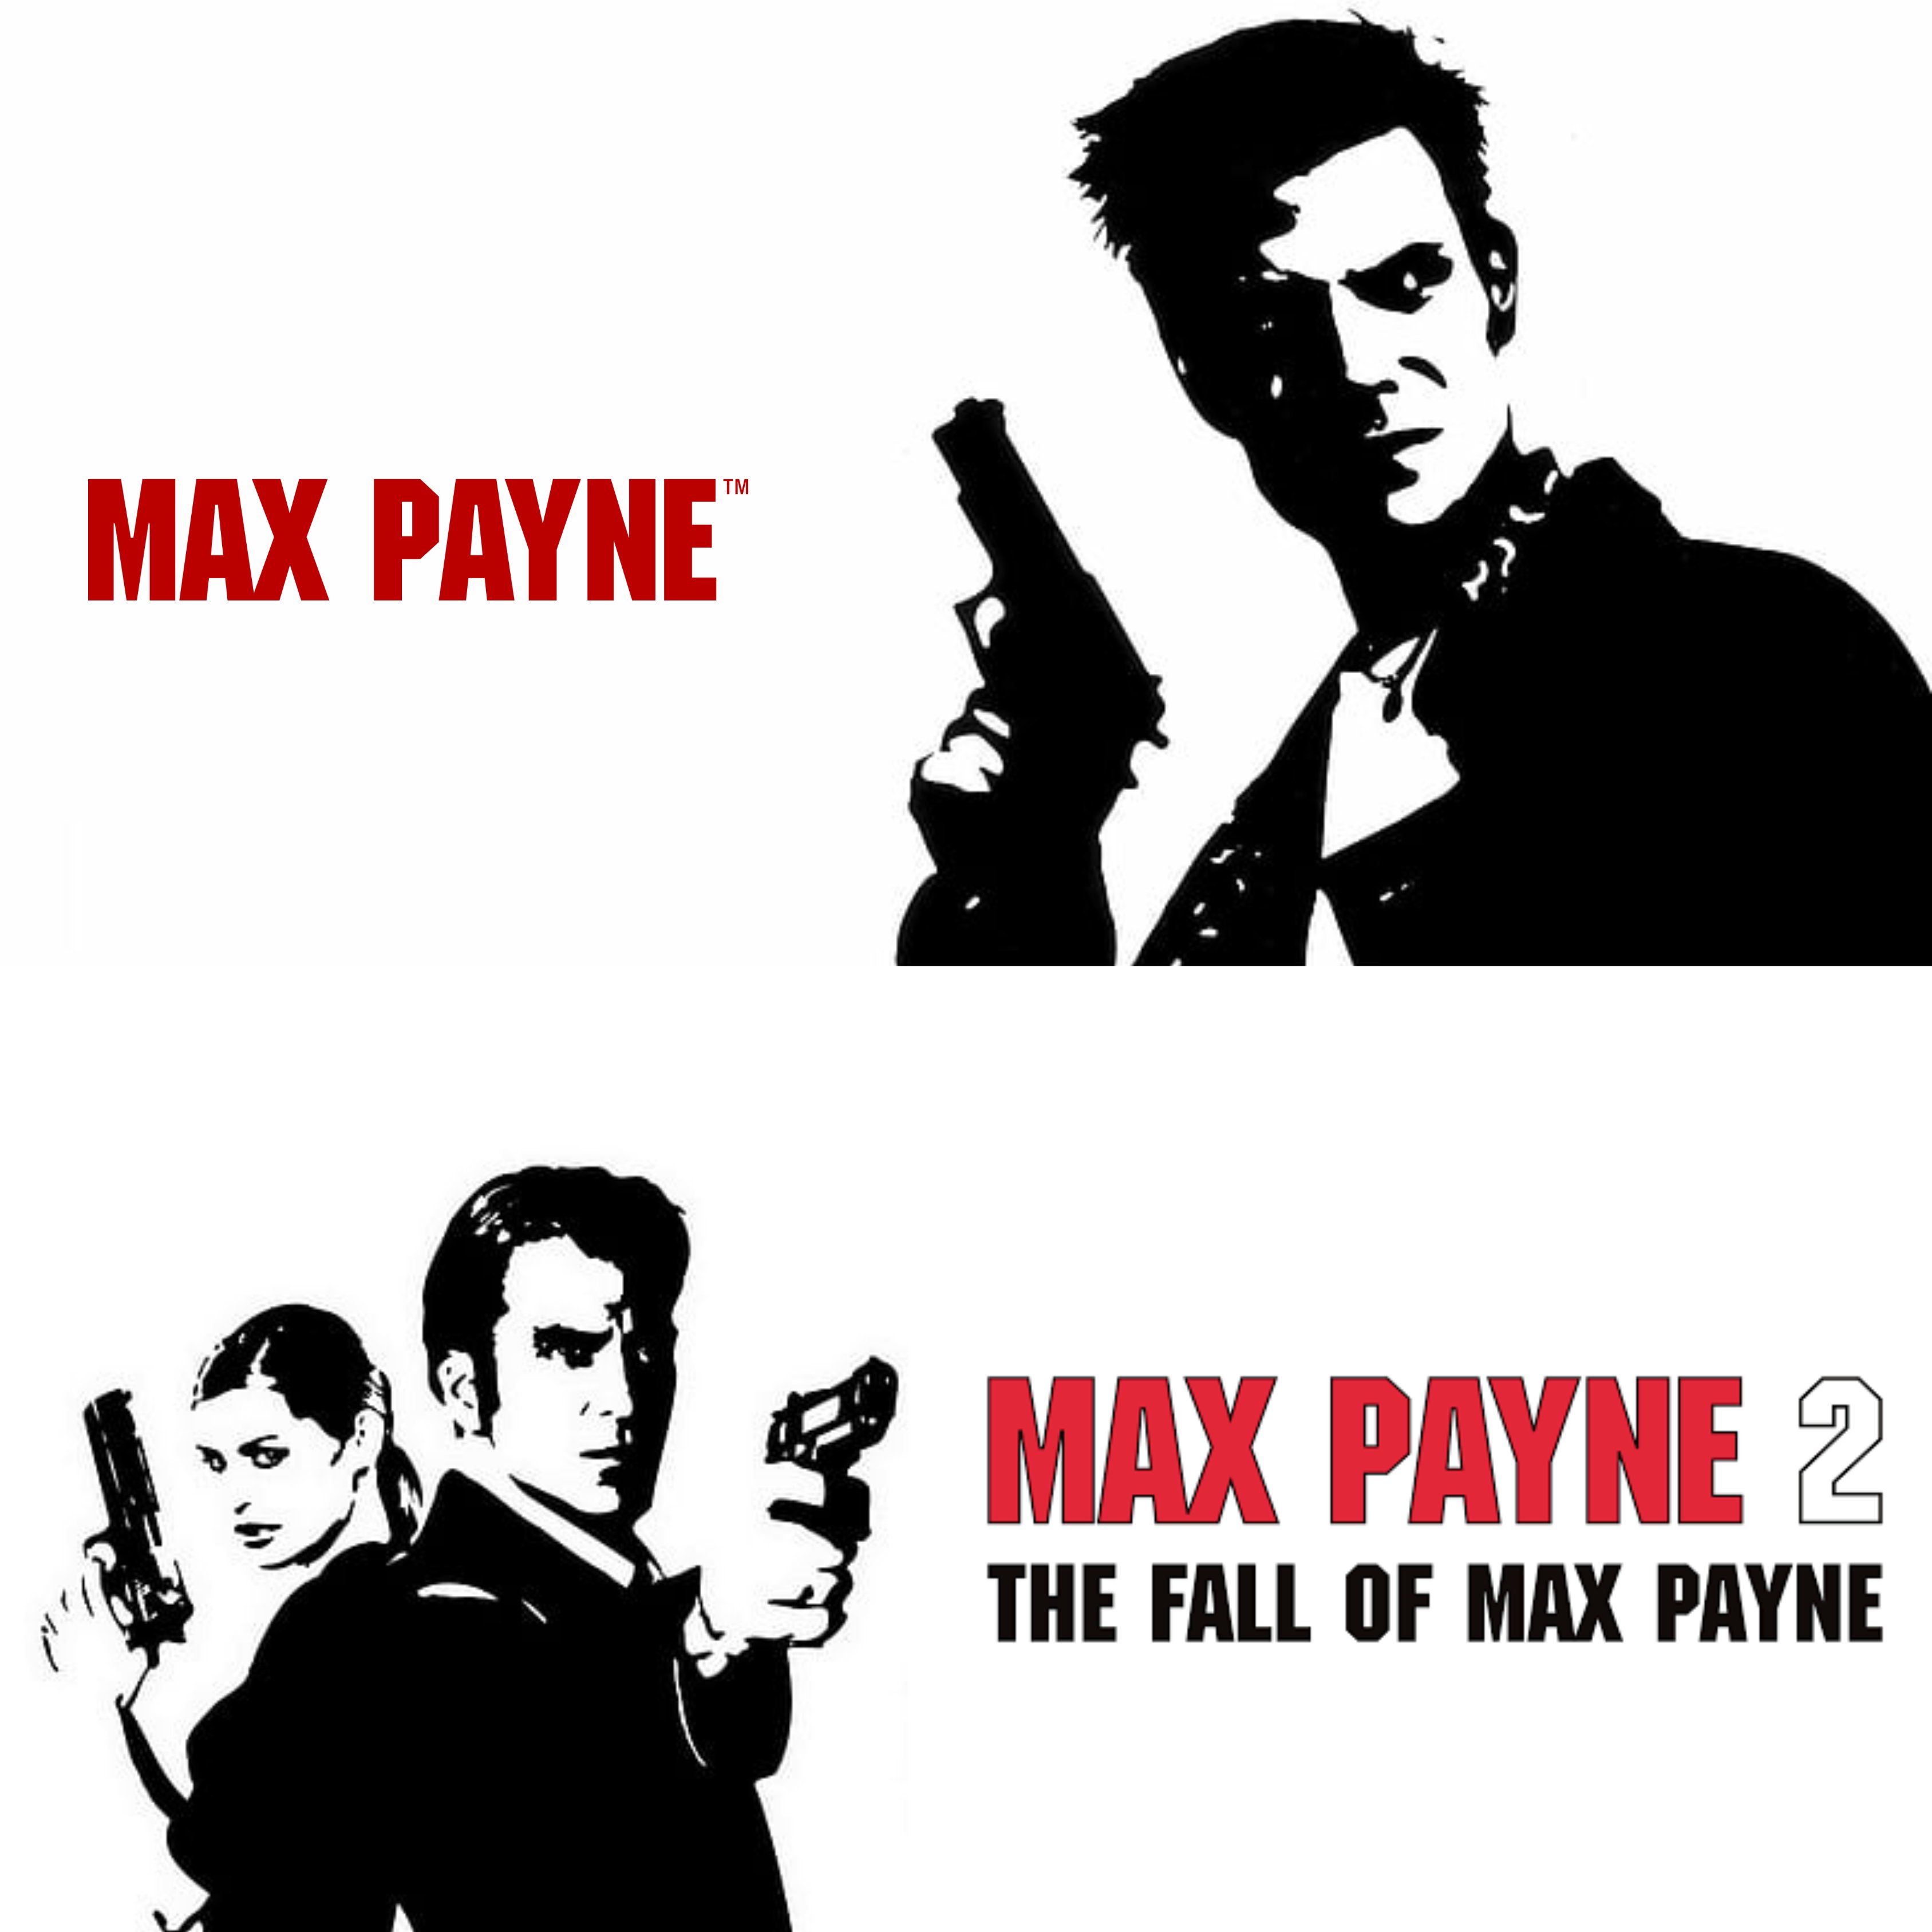 Max Payne 1 & 2 remakes are still in the concept stage